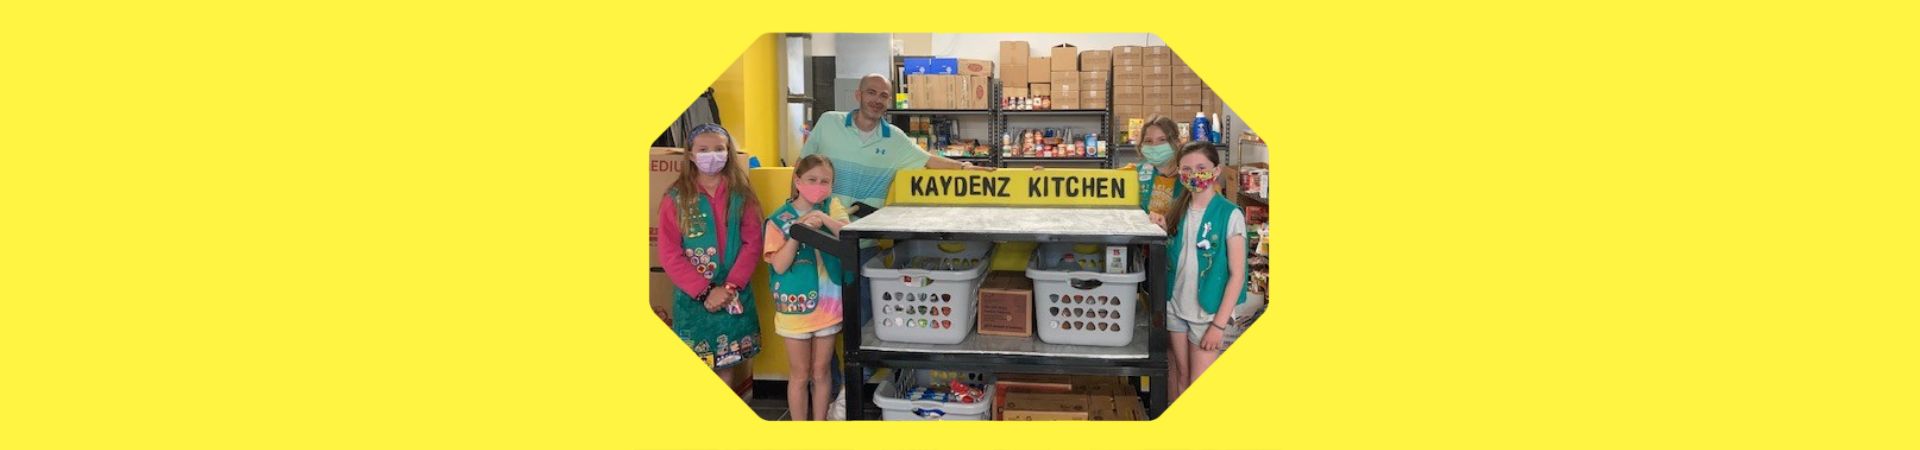  Girls from troop 507 standing next to the cart they built for Kaydenz Kitchen Food Pantry 